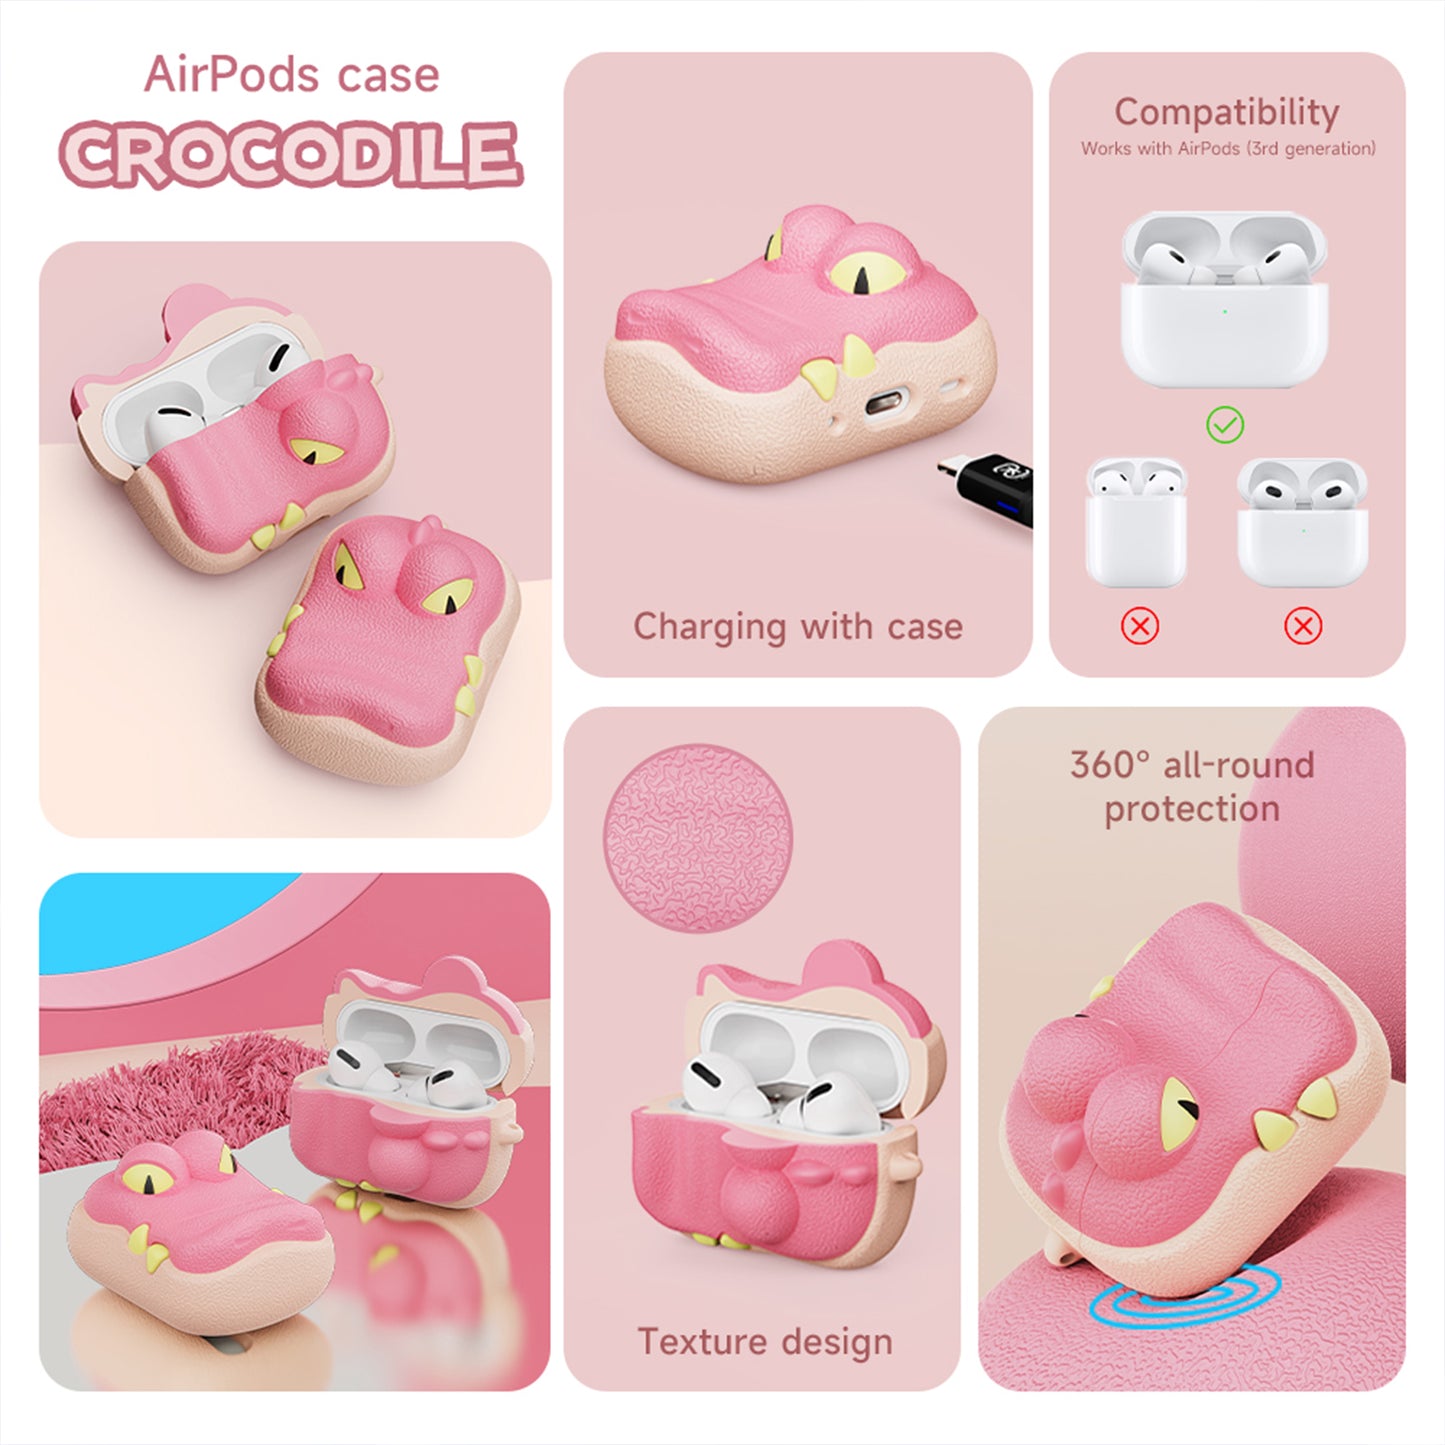 SIKAI 100% Recycle Super Cute Pinky Crocodile Silicone Case For Airpods Pro 1 2 Airpods 3 Protective Cover Earphone Case For Air Pods Pro  BUY 1 GET 1 FREE